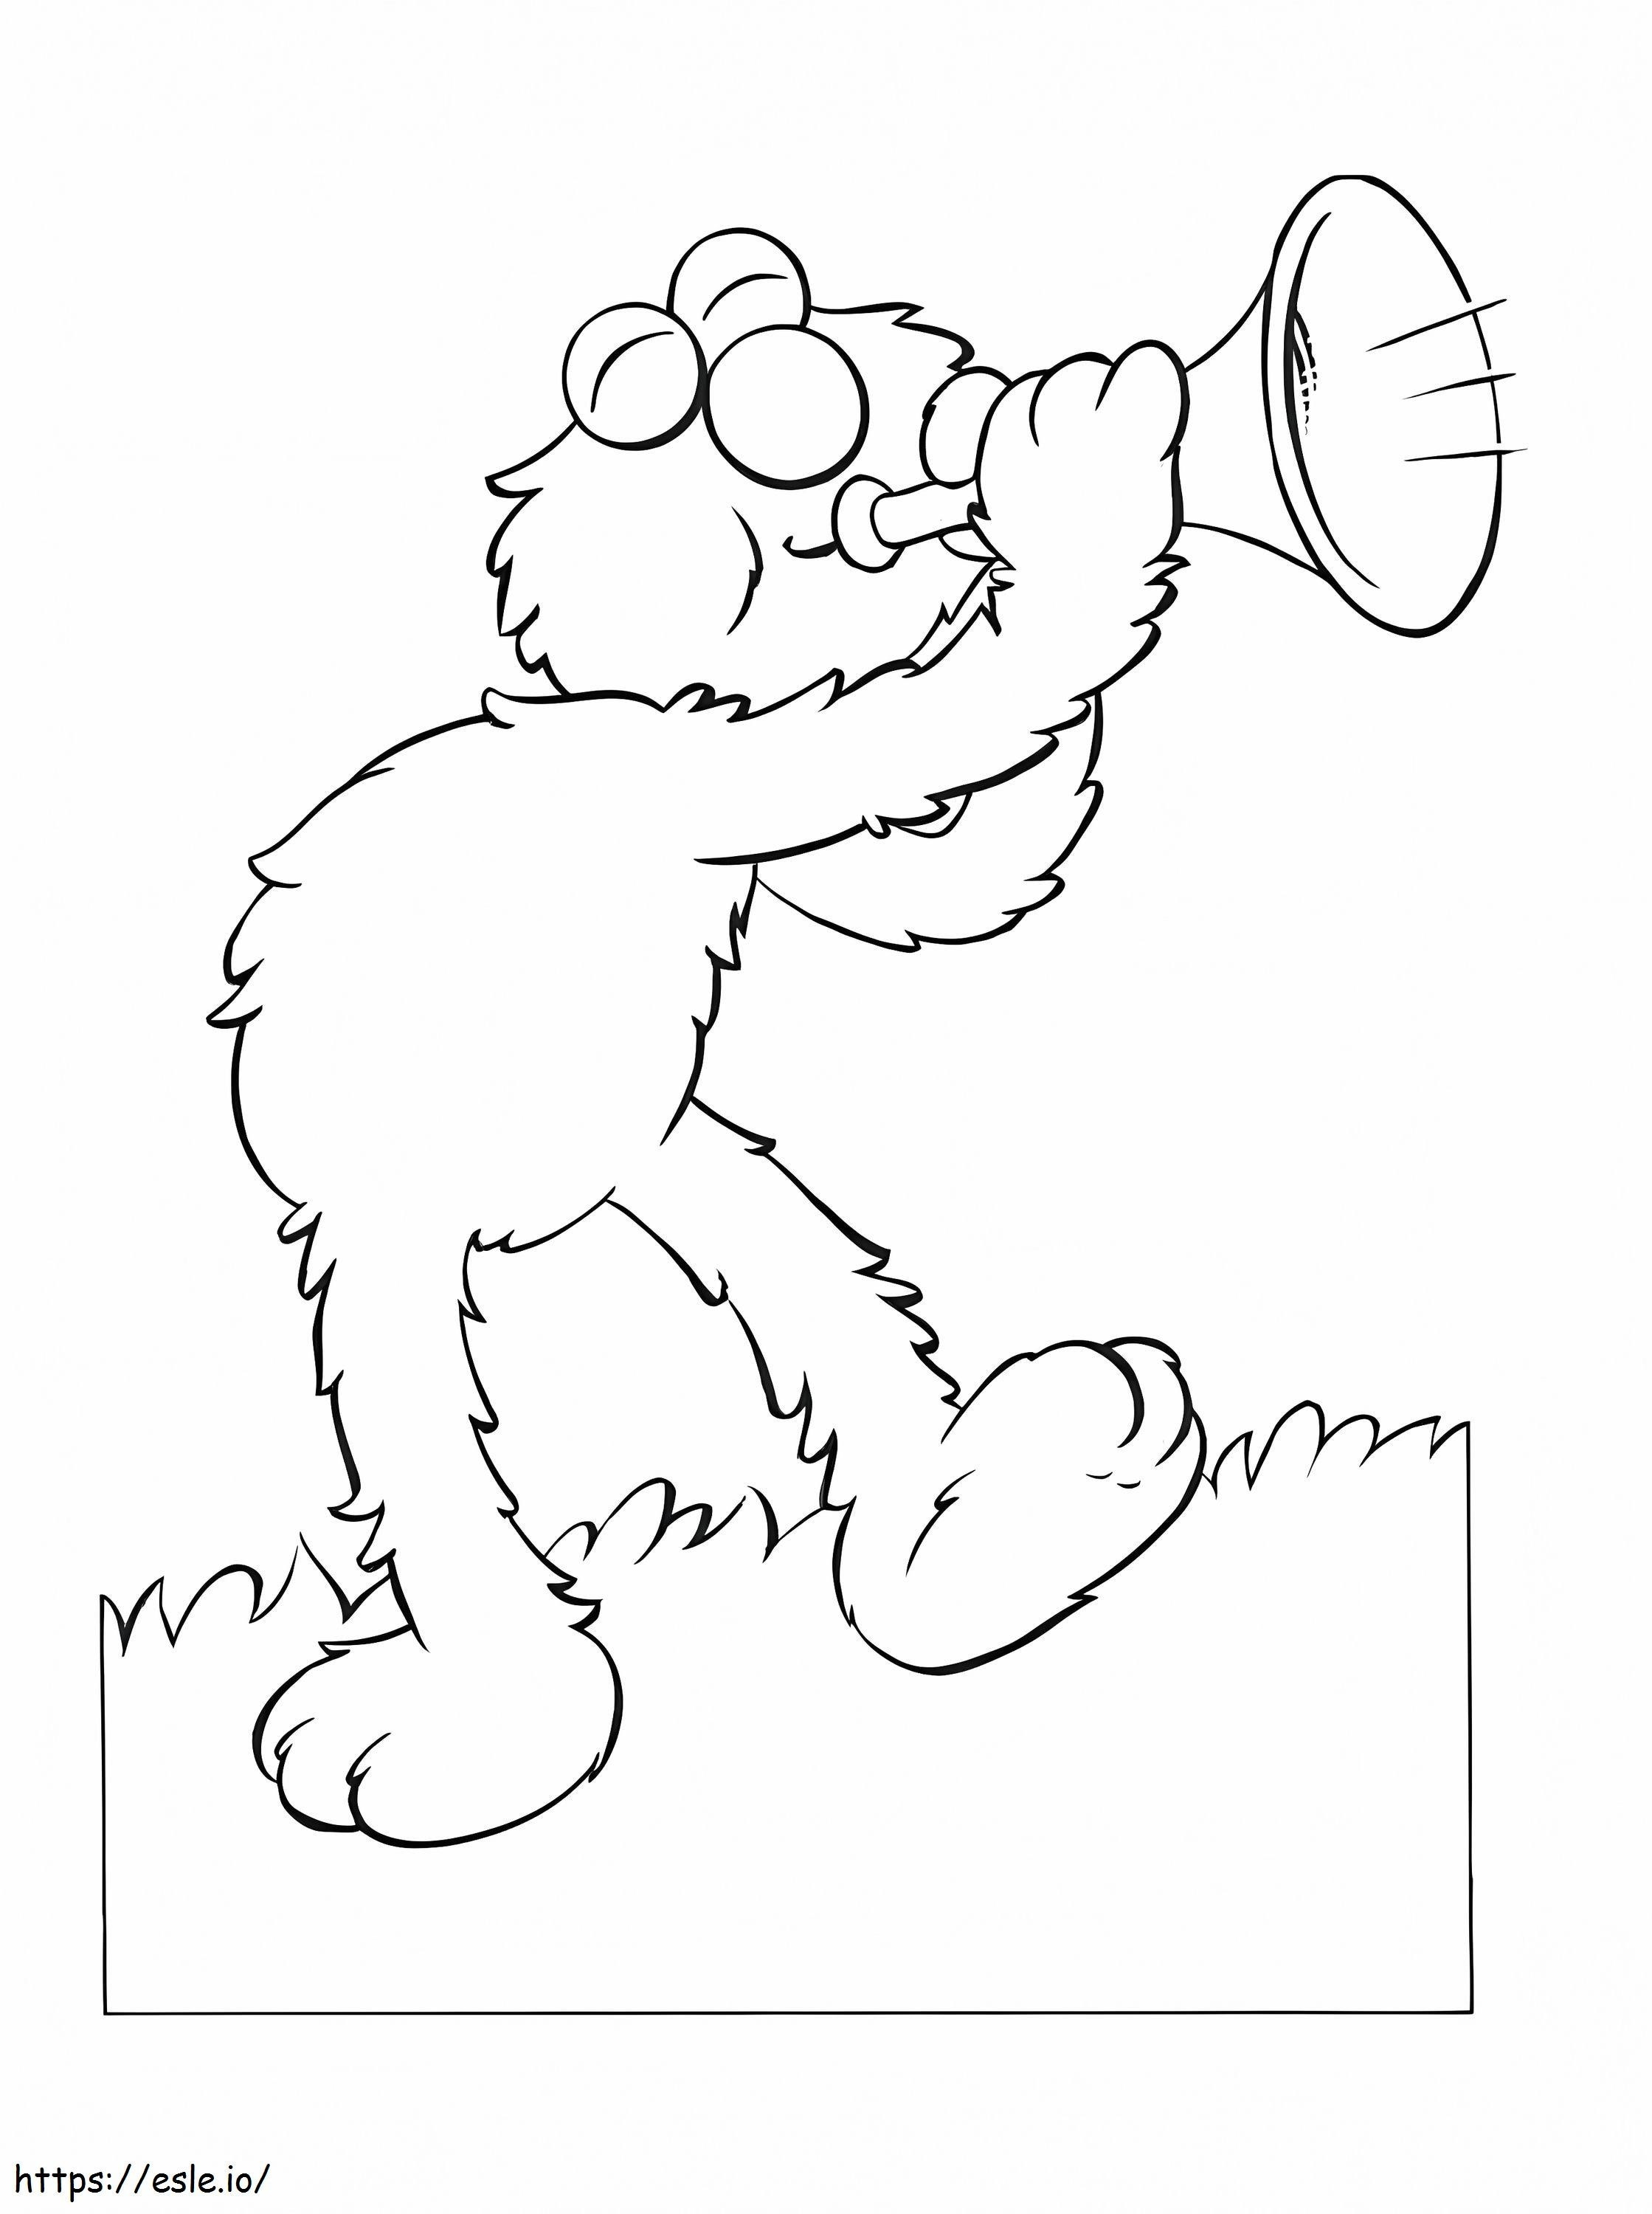 Elmo Blowing Trumpet coloring page